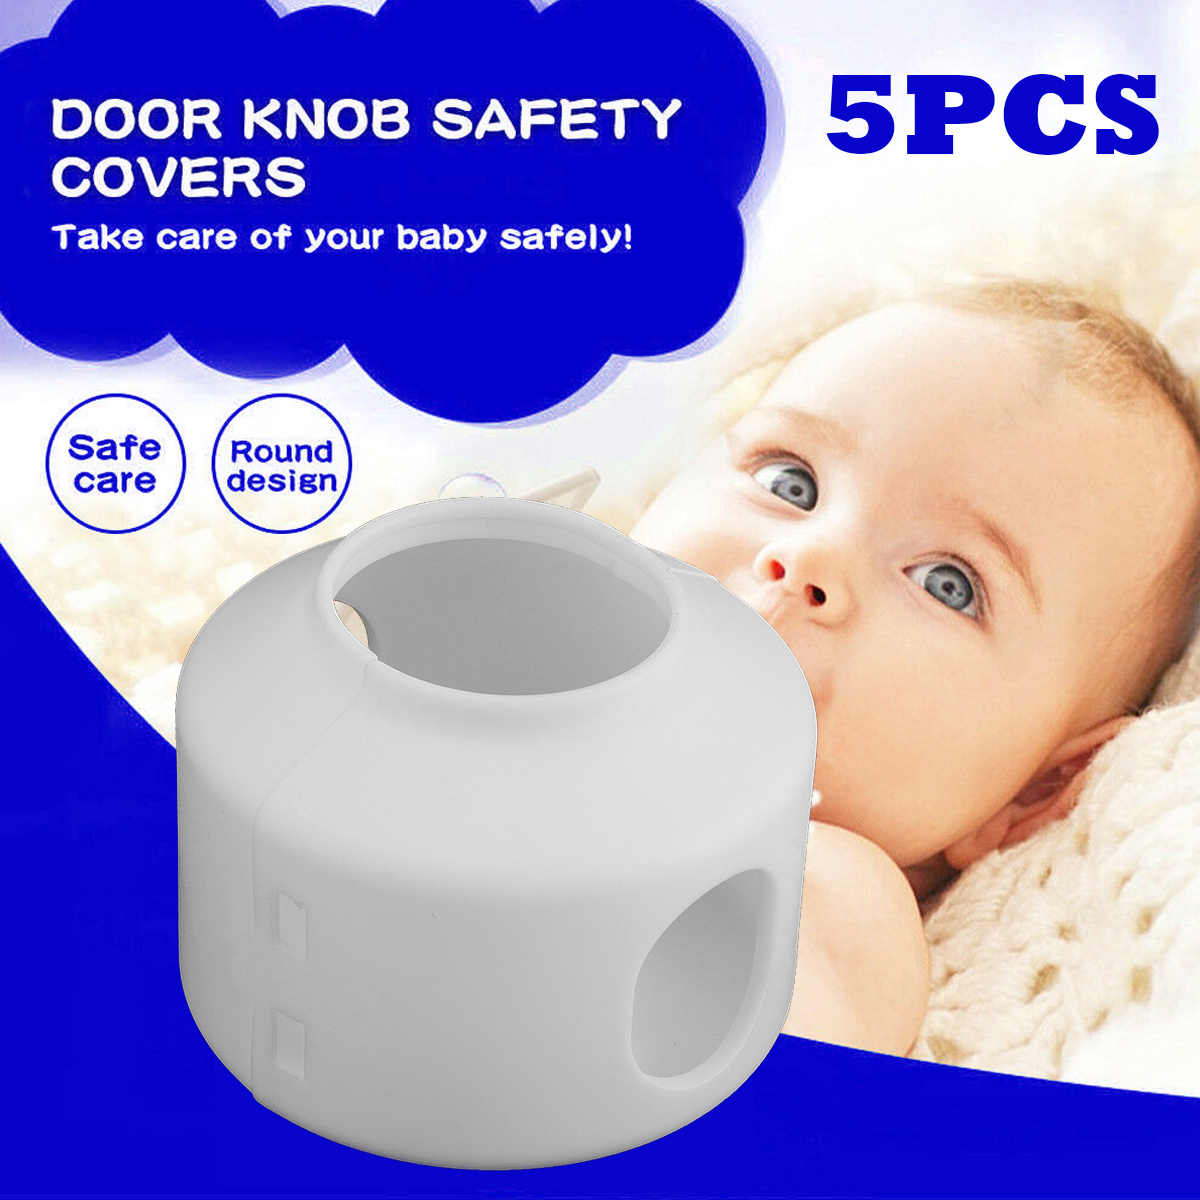 5PCS-Child-Proof-Safety-Doors-Handle-Bedroom-Protective-Door-Knob-Safety-Cover-Lockable-1730878-1